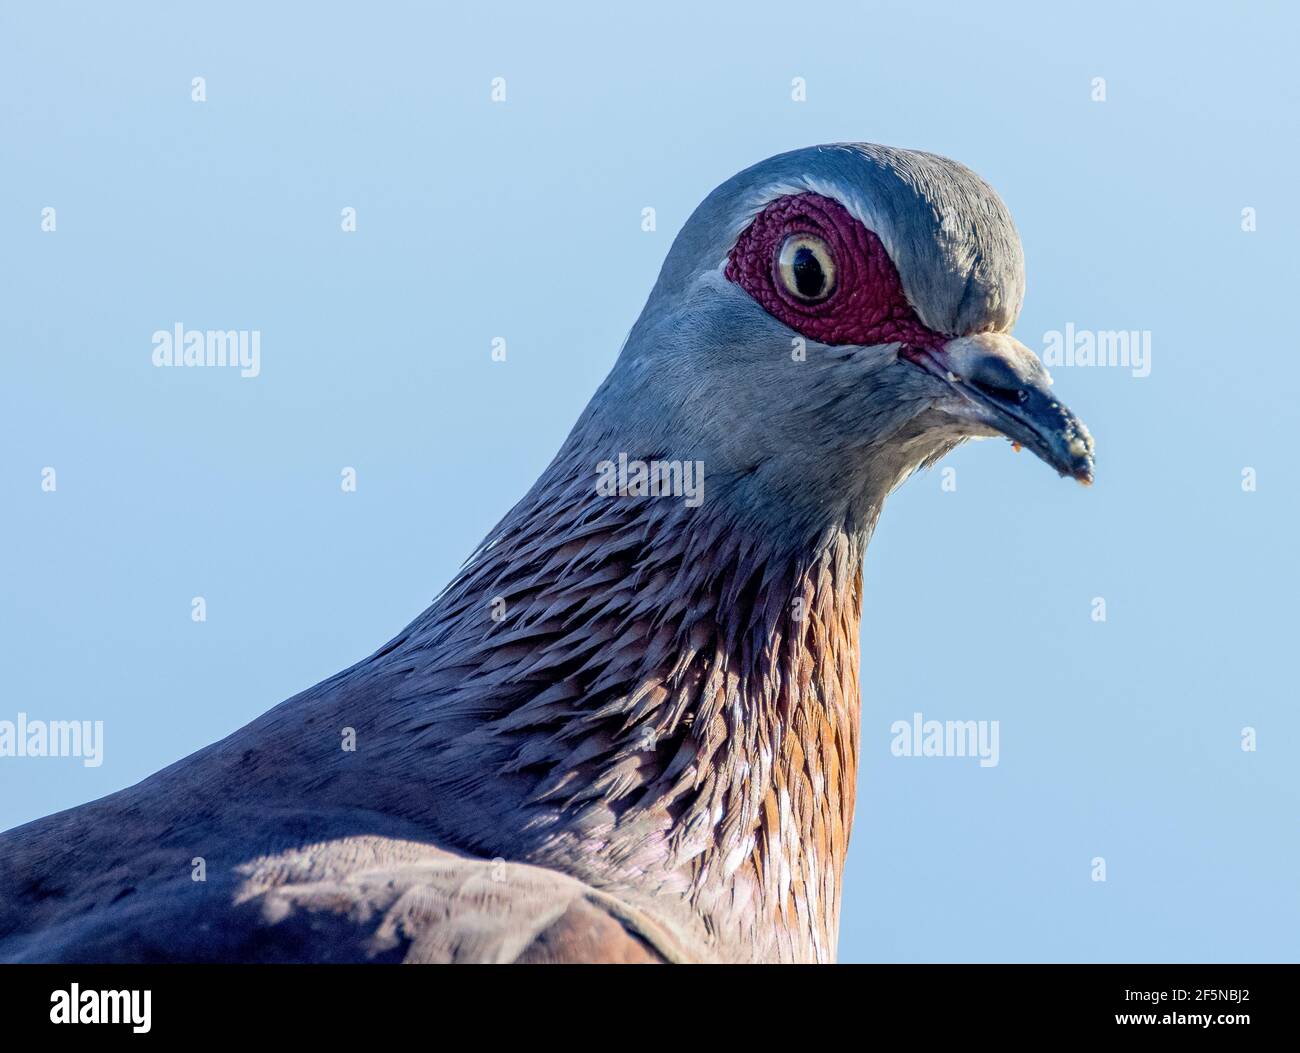 Close up of the head of an African Rock Pigeon / Speckled pigeon (Columba guinea) on Table Mountain, Cape Town, South Africa. Stock Photo